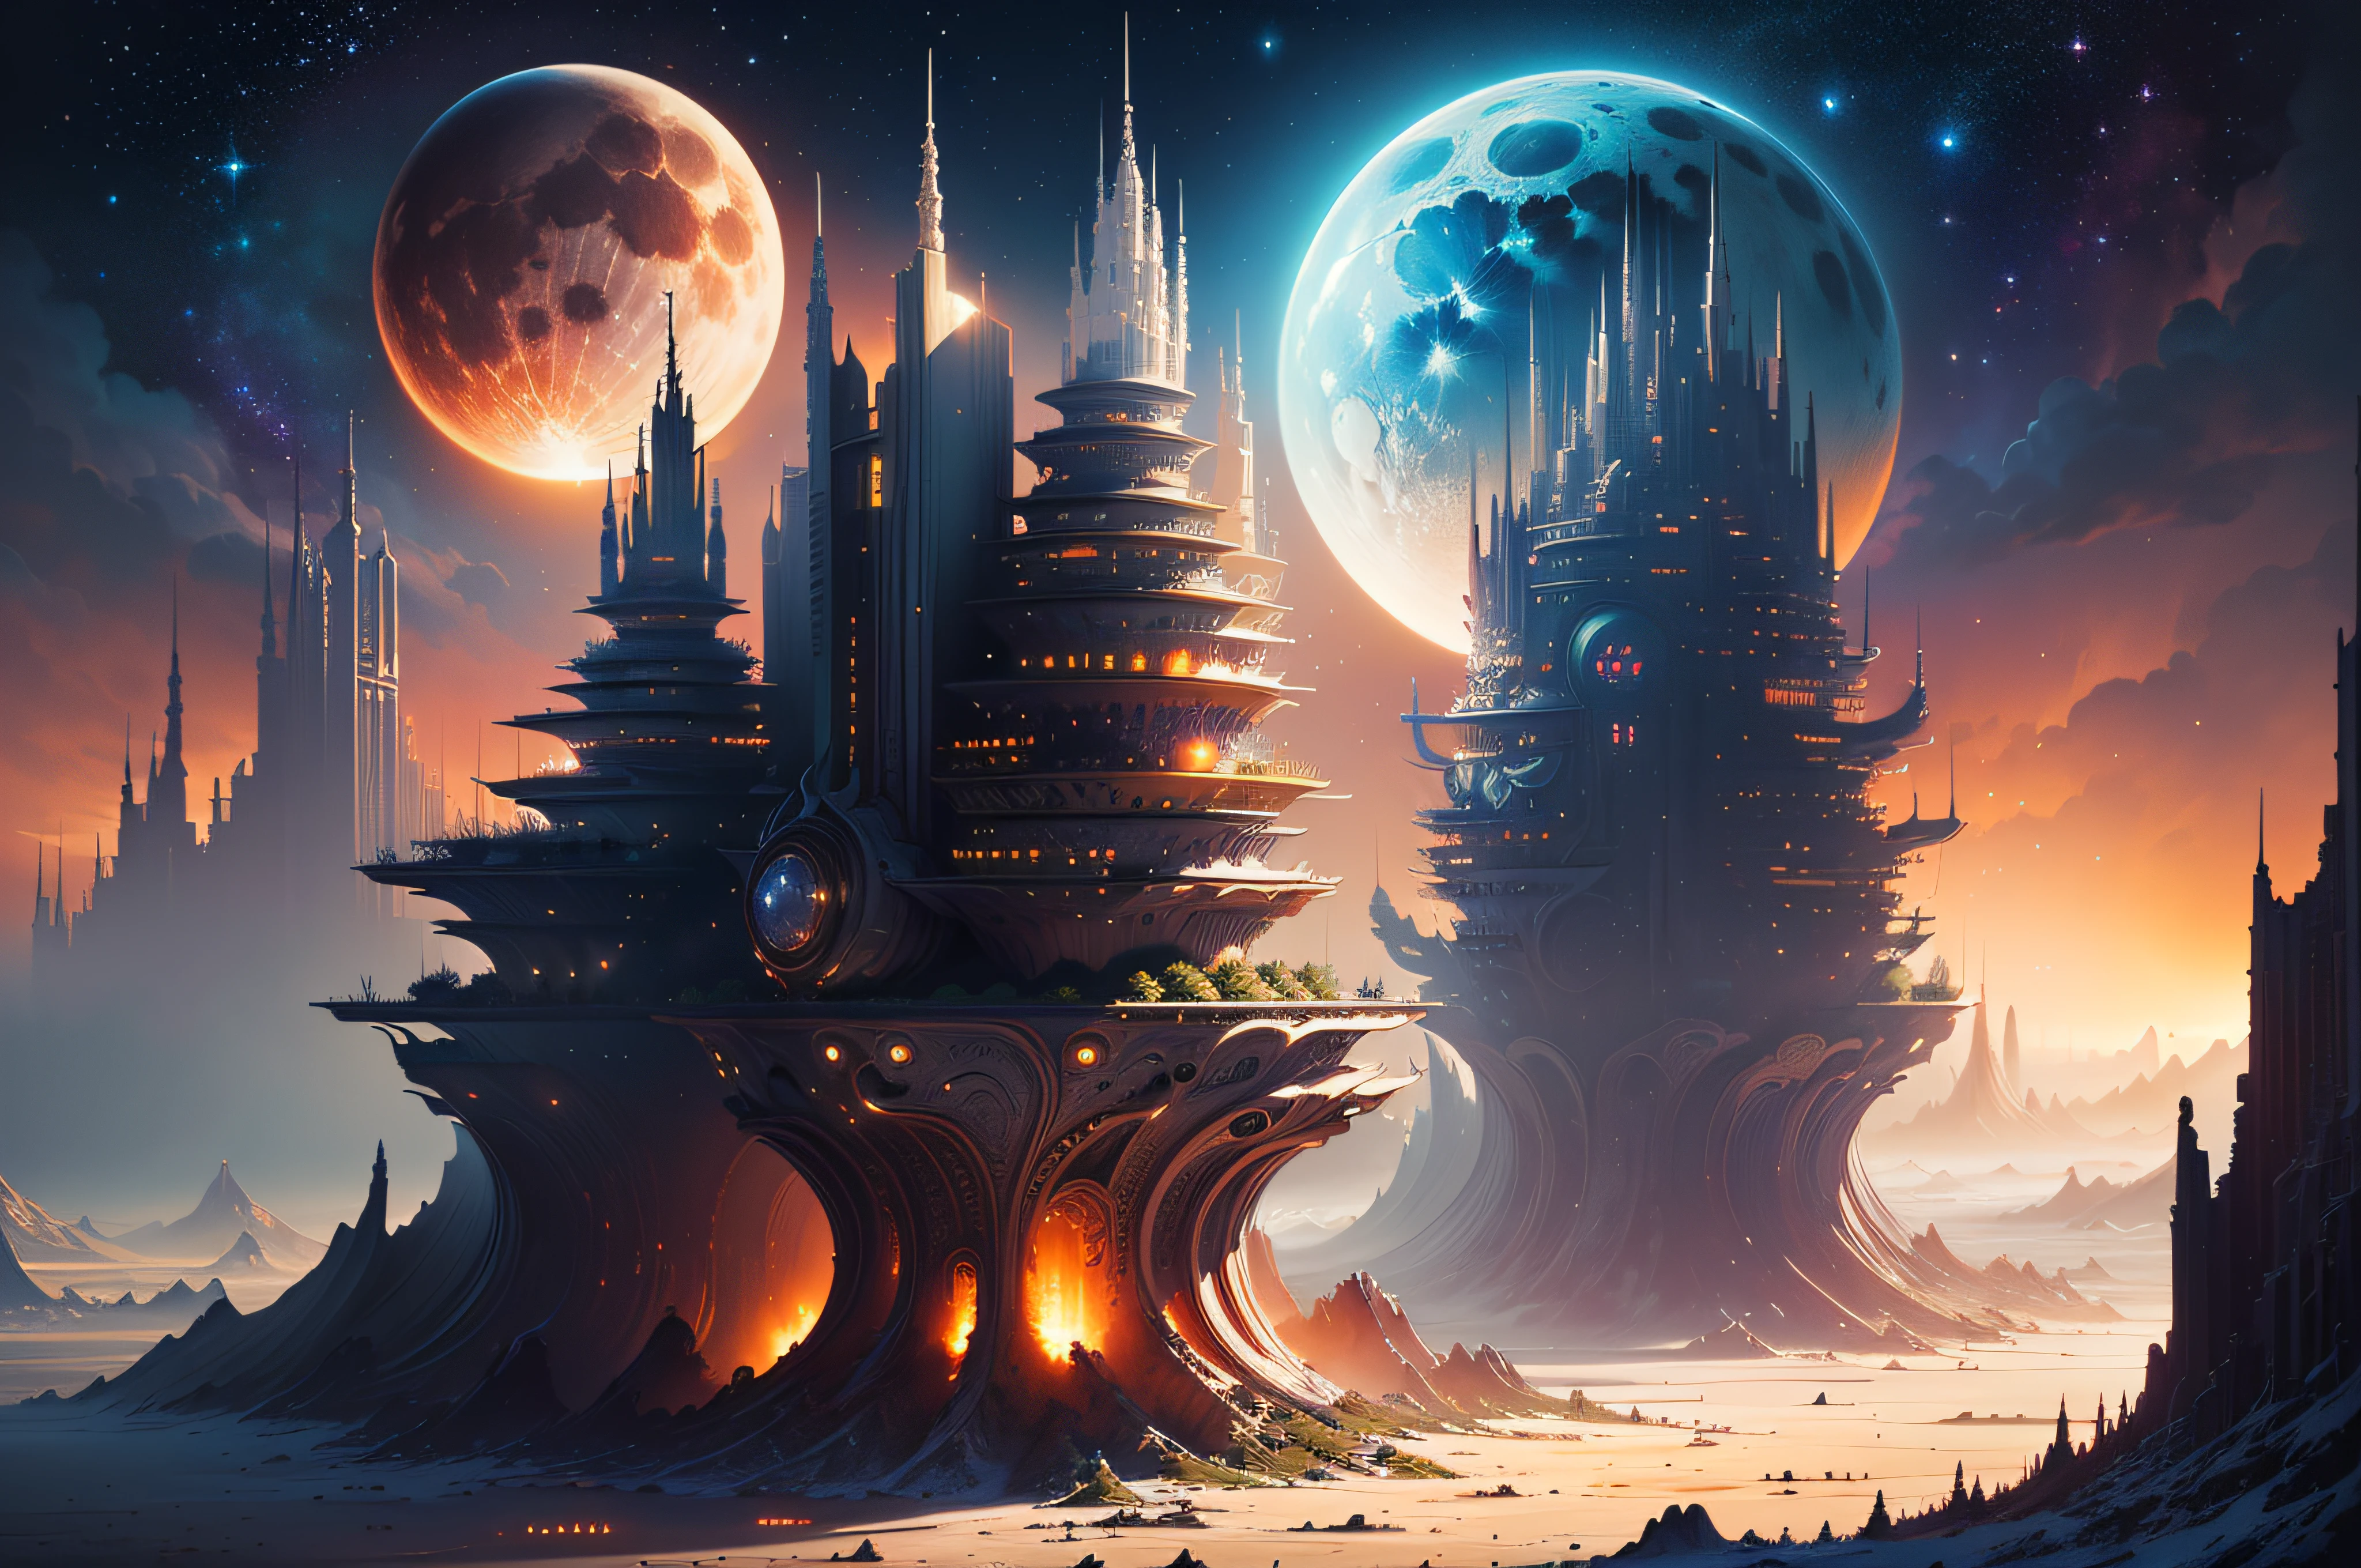 masterpiece, intricate details, ff14style, painting of futuristic city on the moon, space, stars, galaxy, planet, vivid colors,